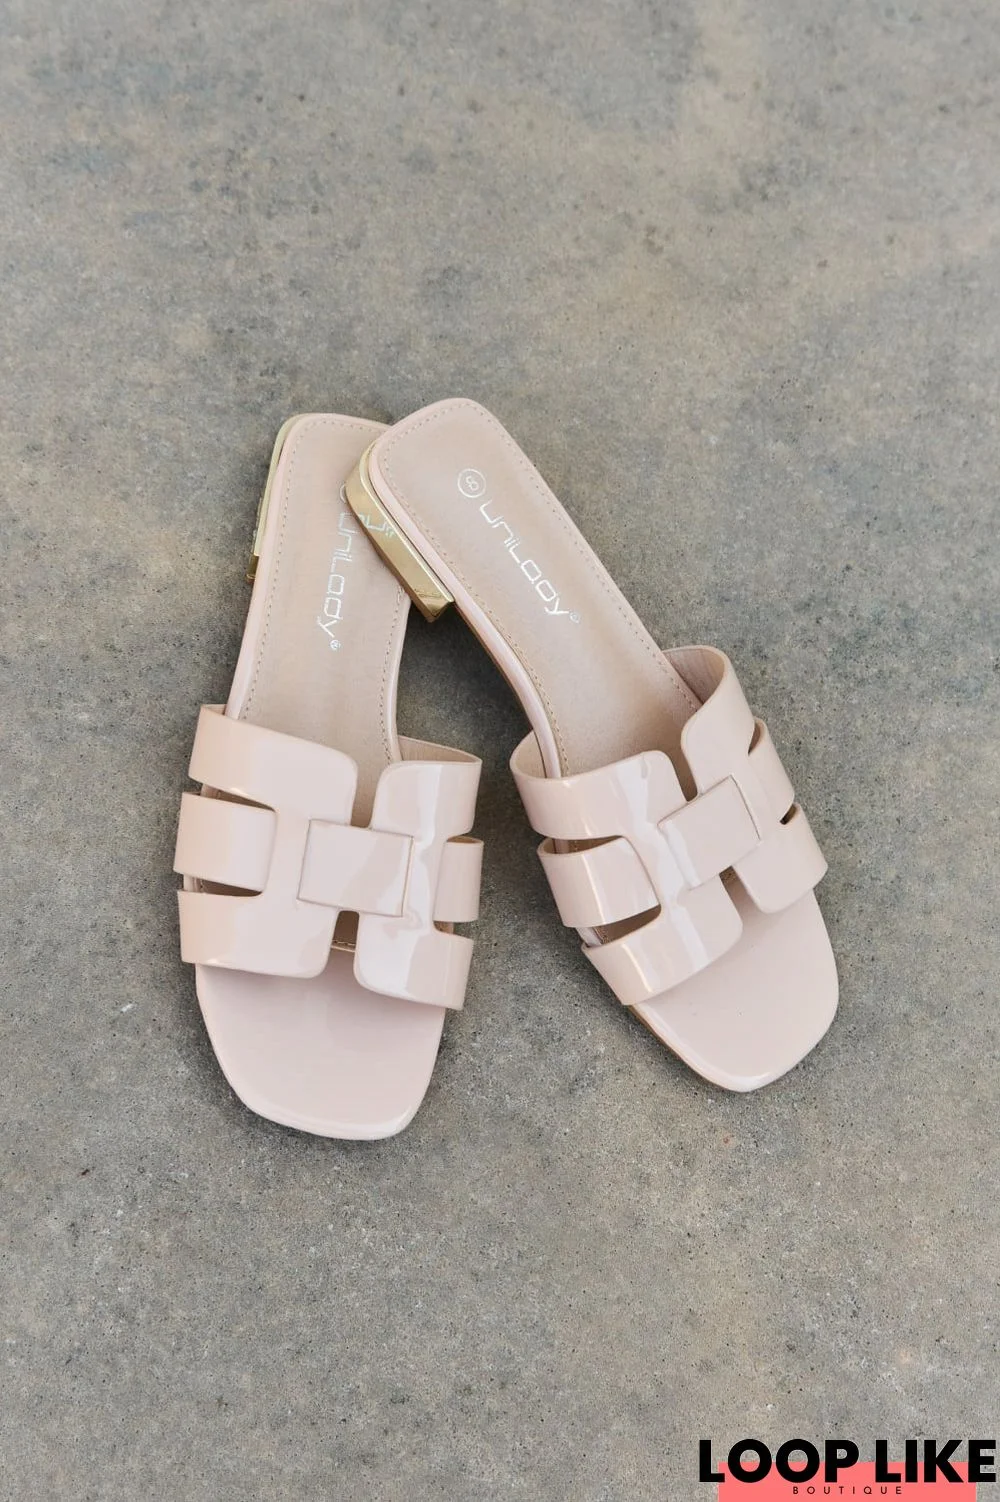 Weeboo Walk It Out Slide Sandals in Nude